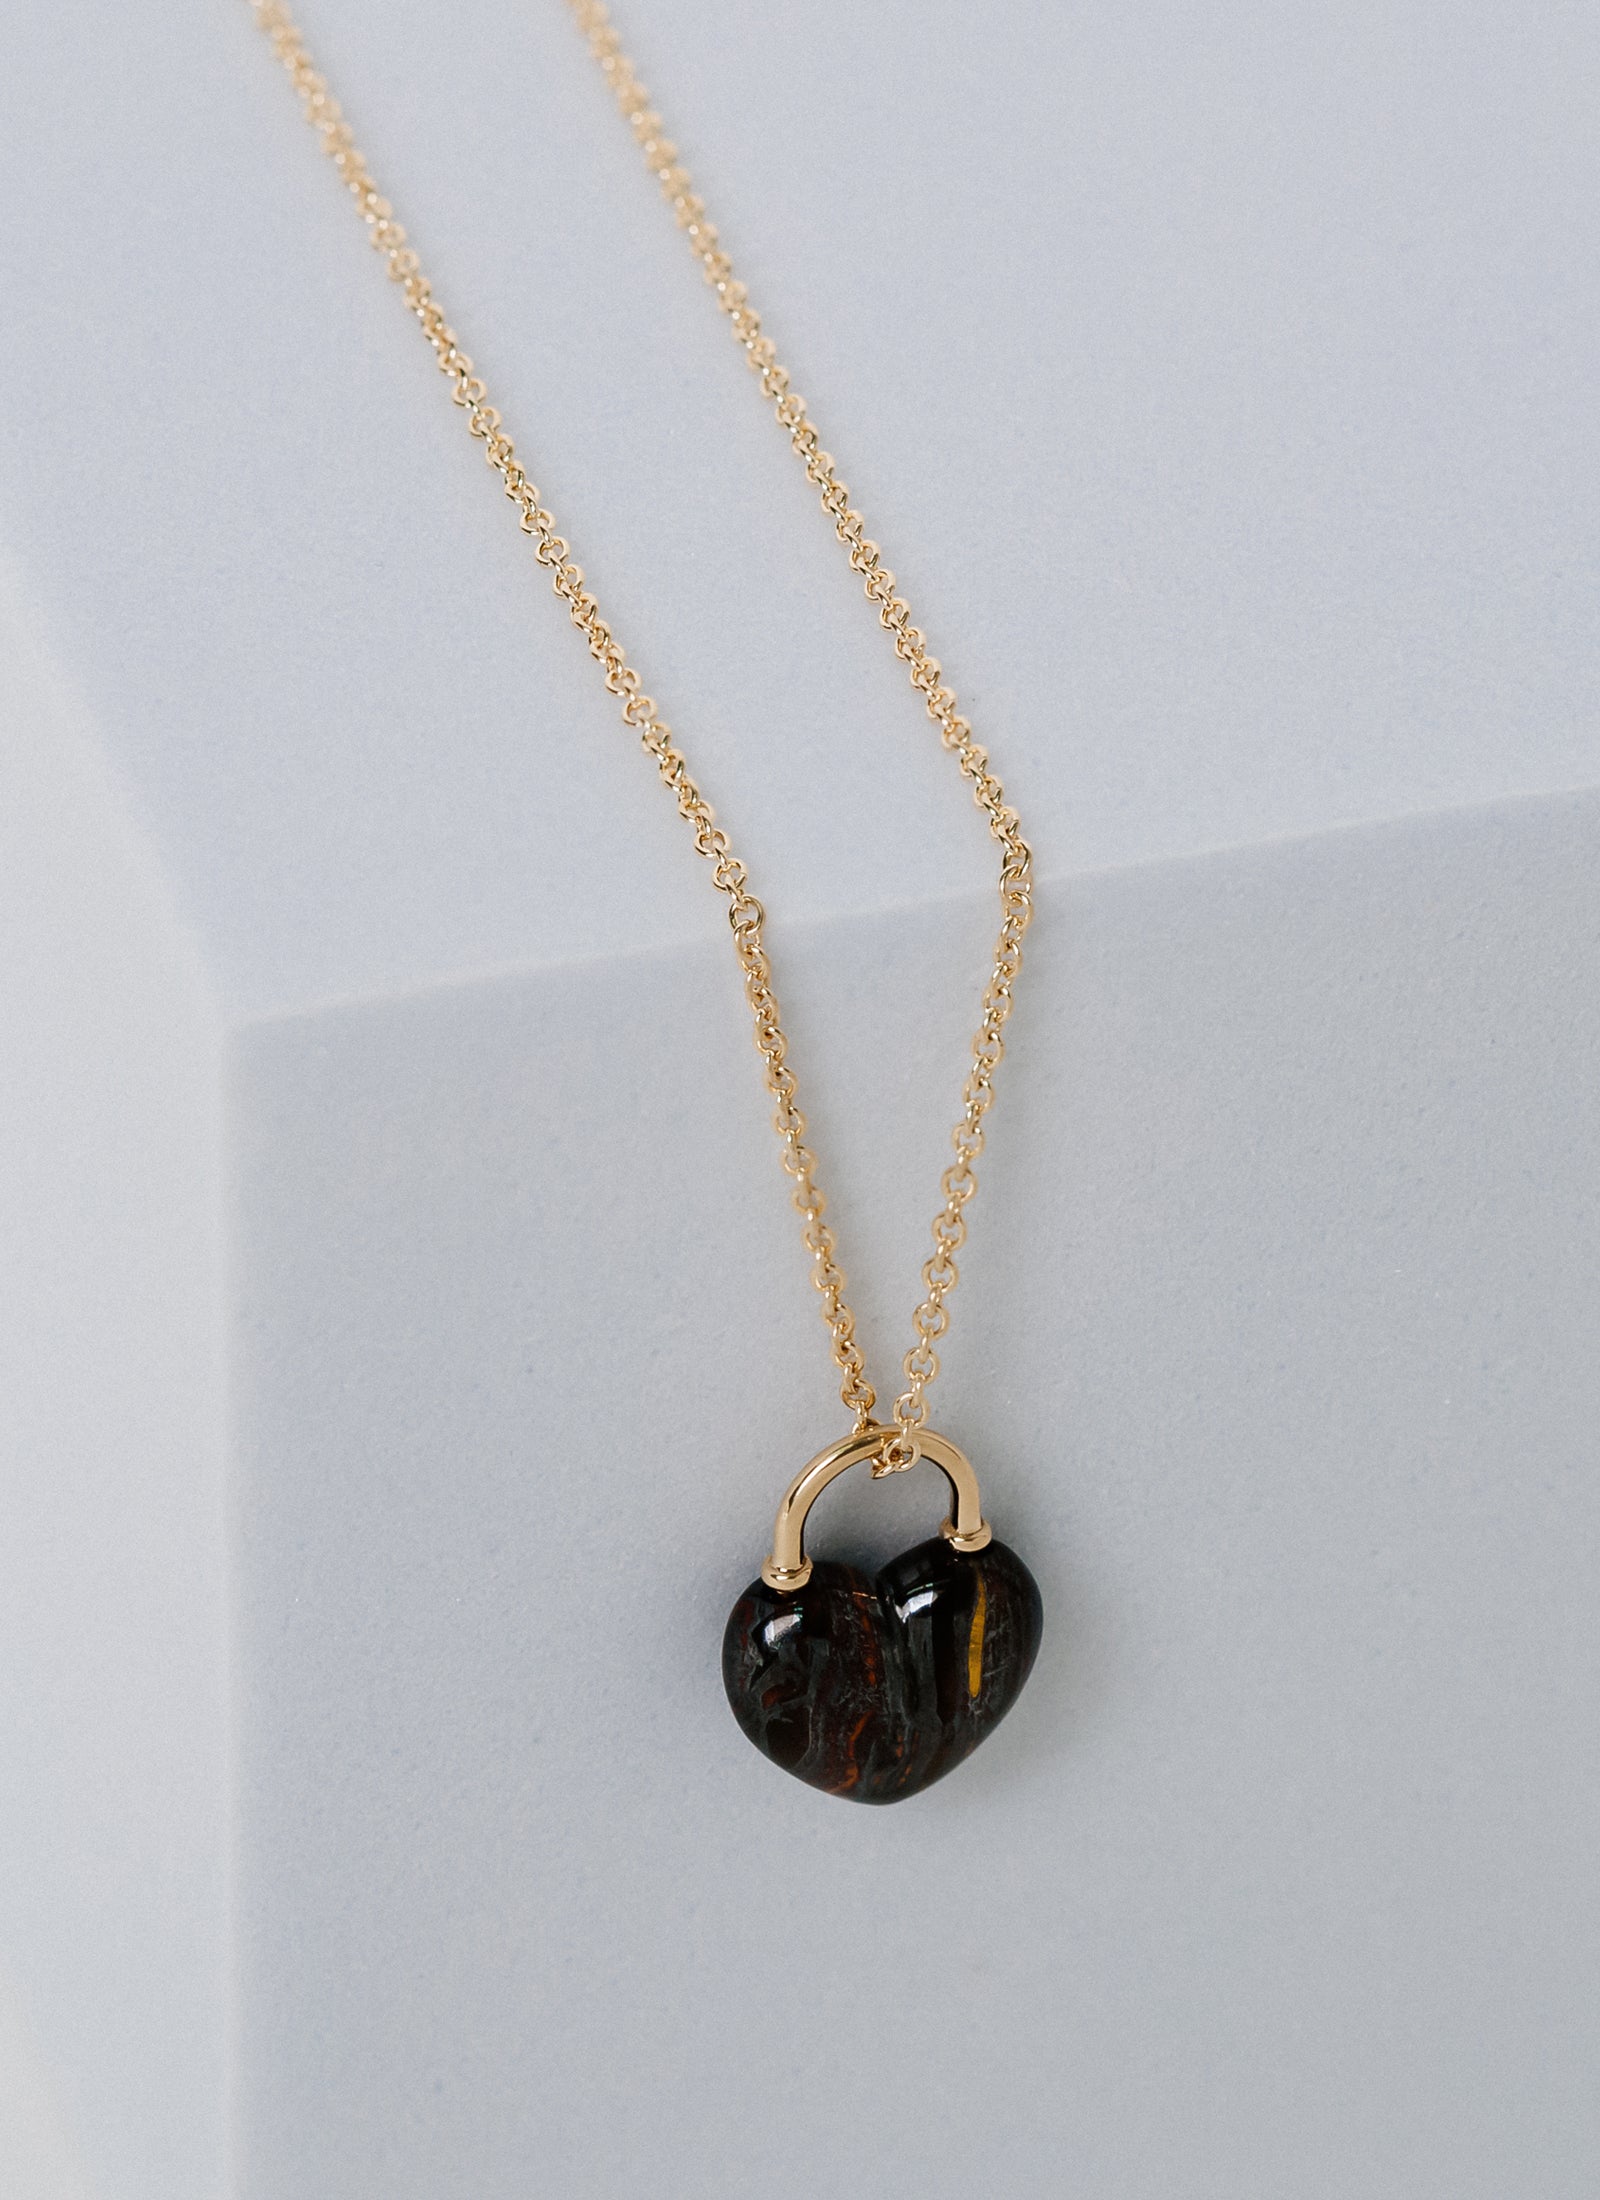 Limited Edition Tiger's Eye Heart Lock Pendant Necklace from RIVA New York